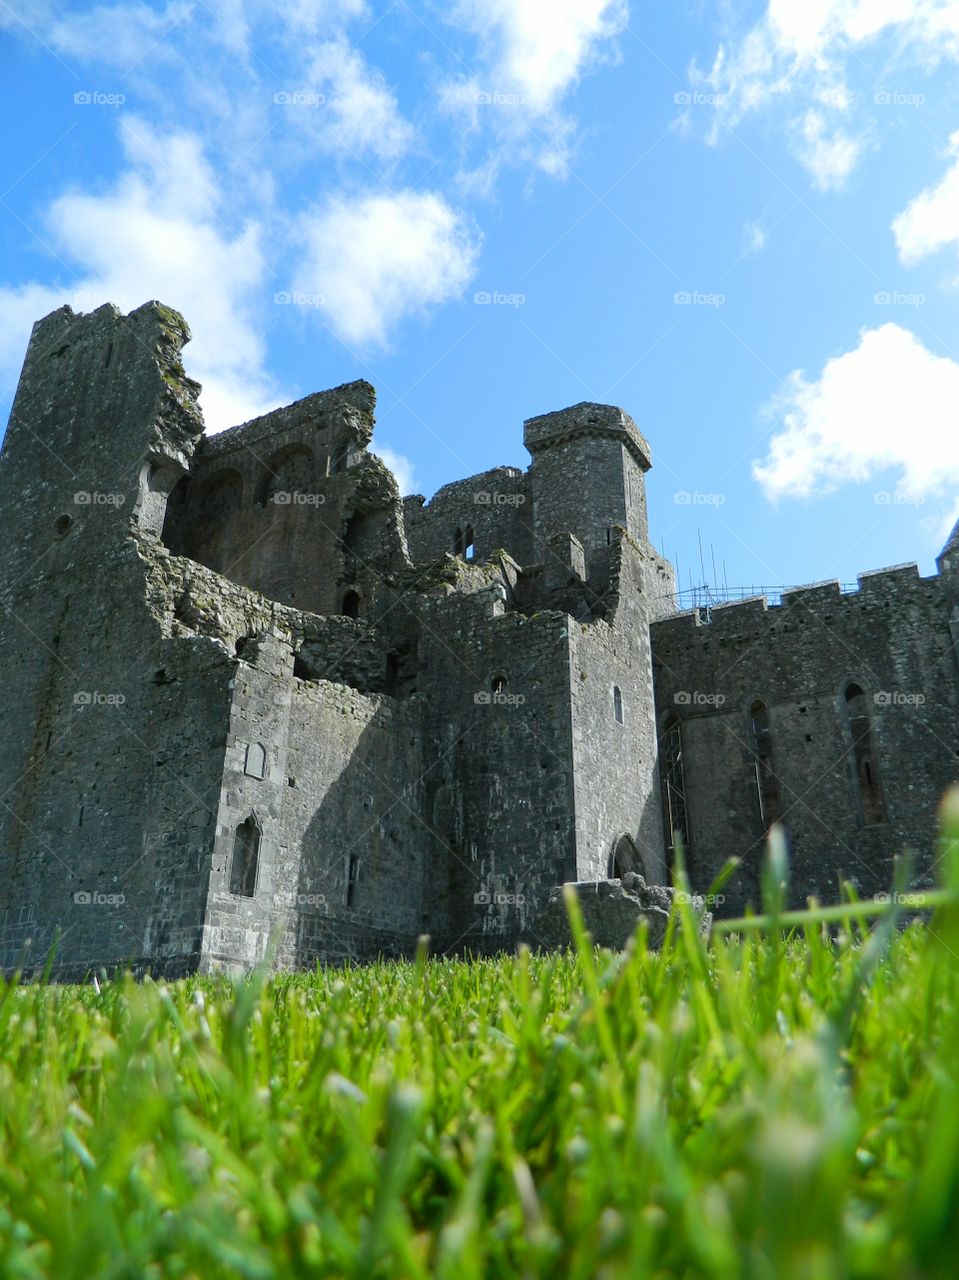 Rock of Cashel, from the grass. 